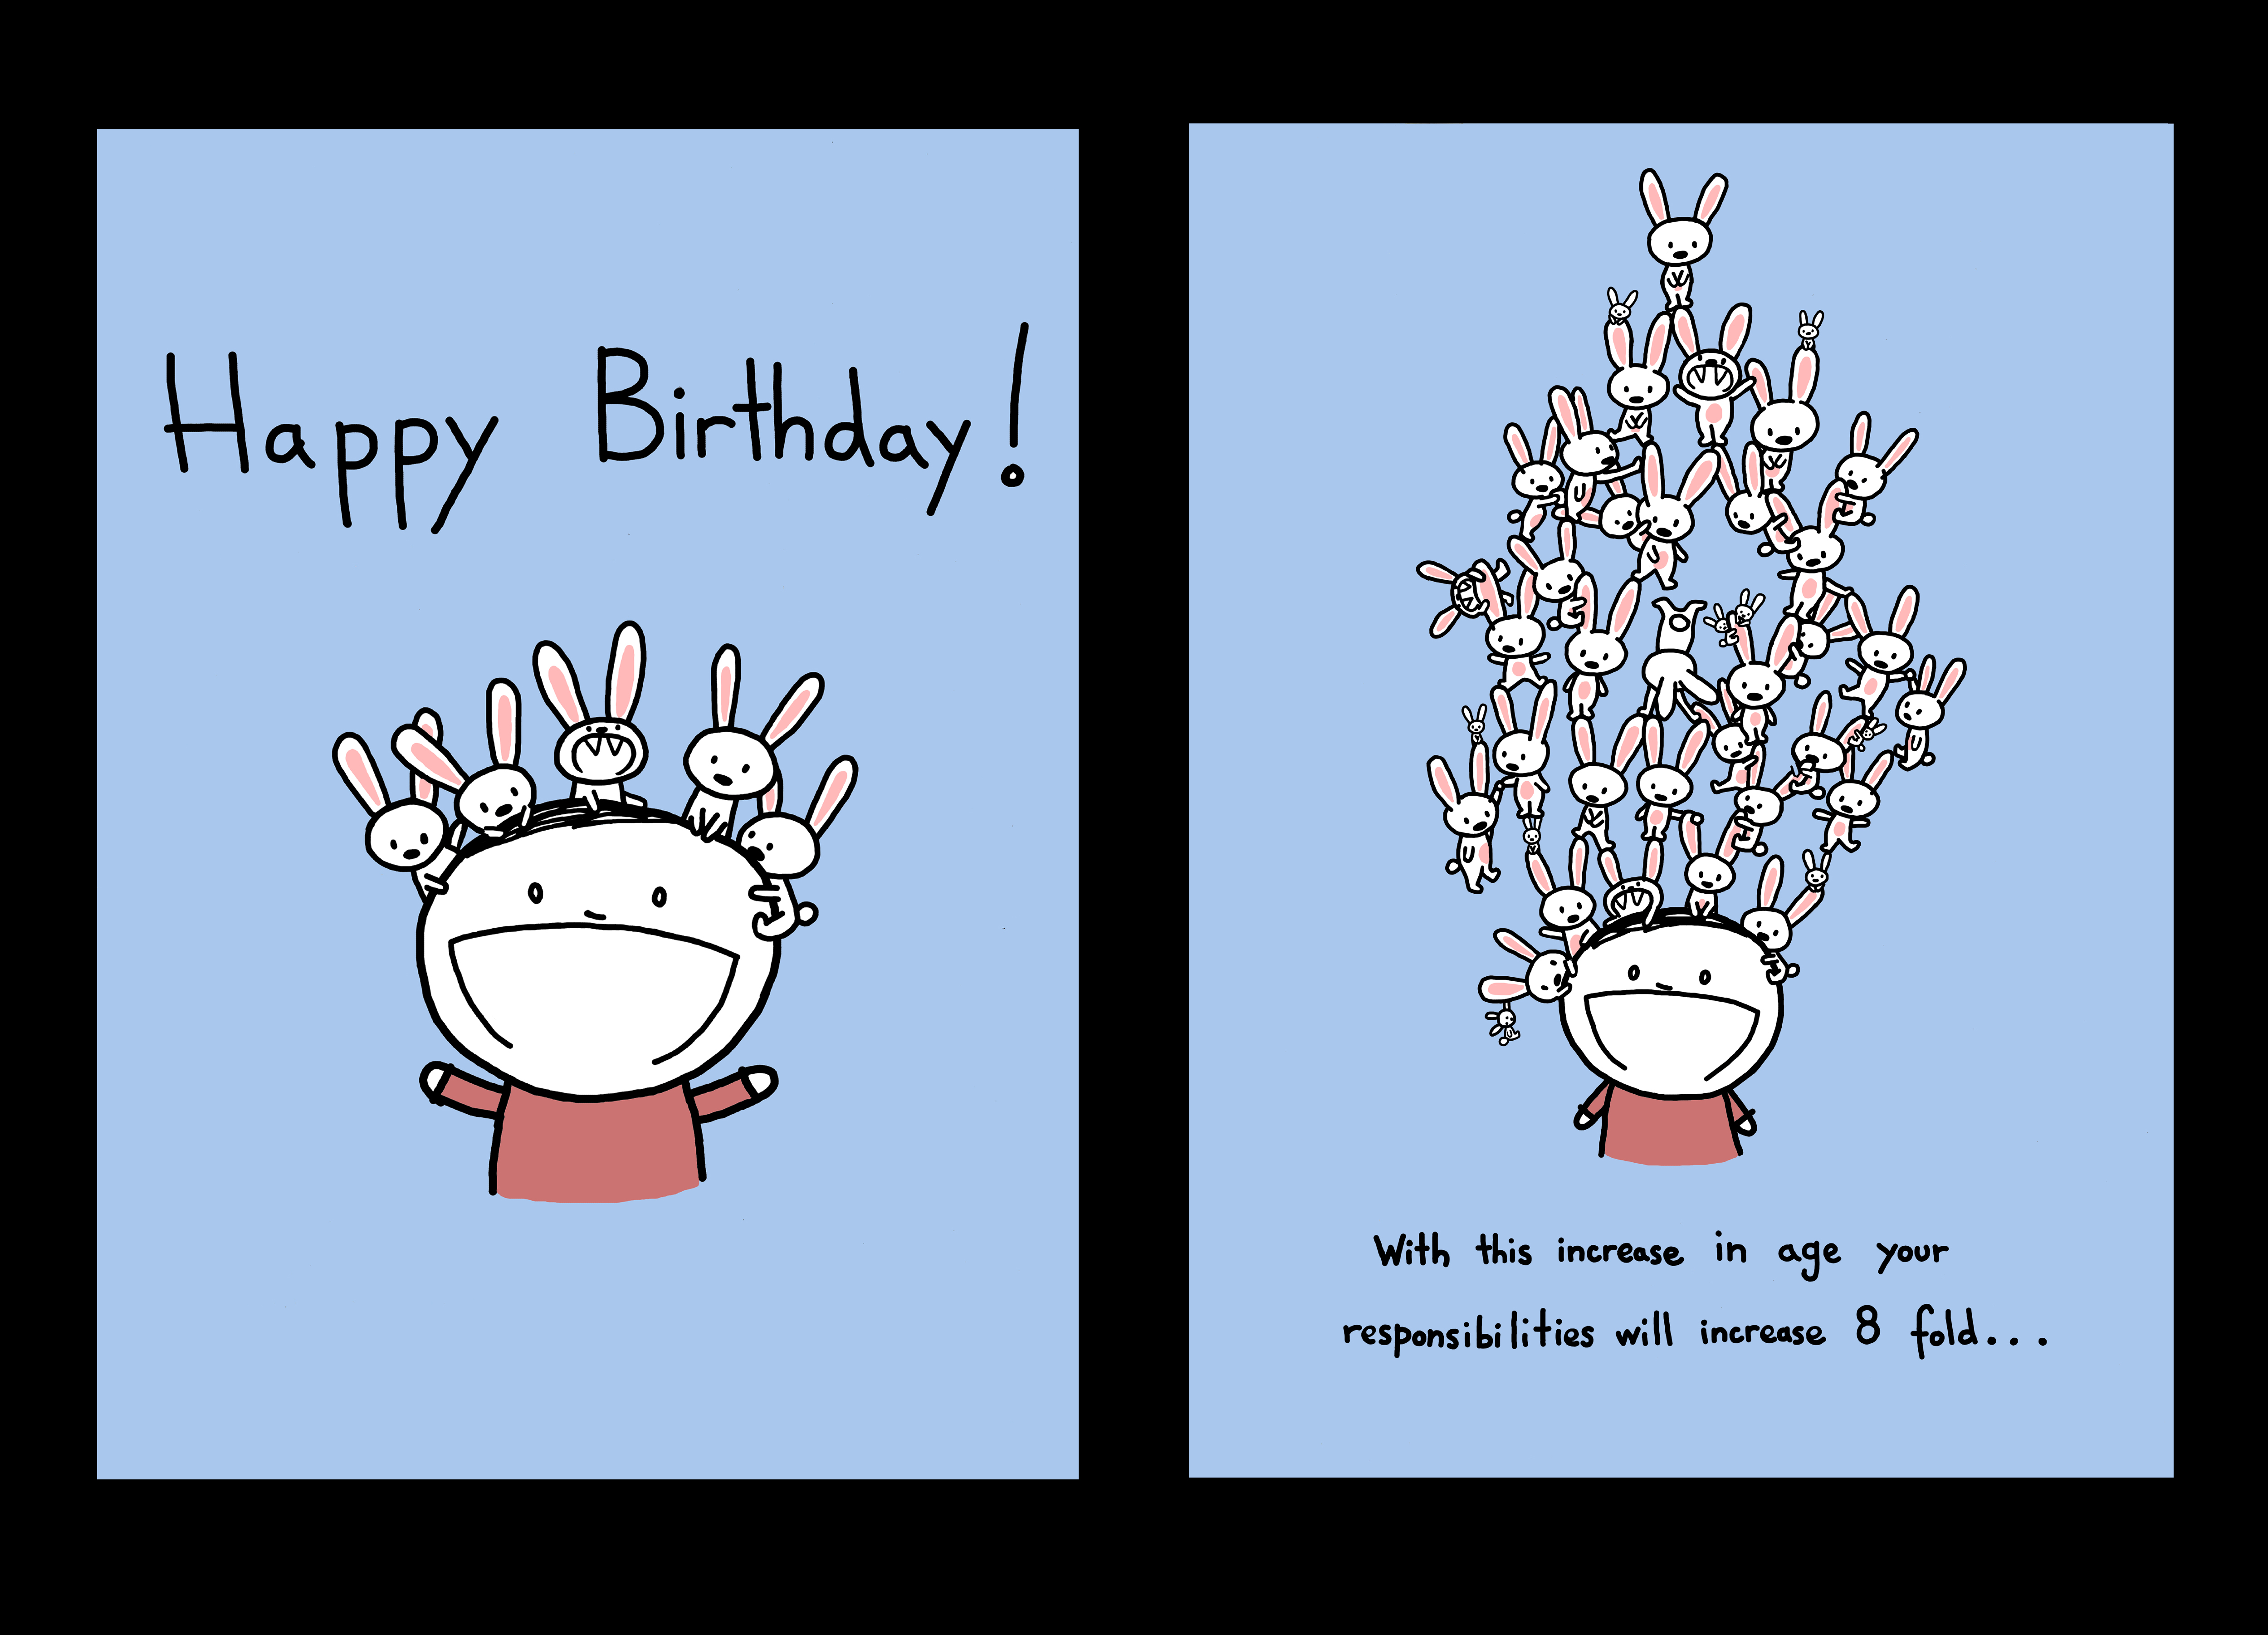 Happy Birthday Cards Download, Top Happy Birthday Card Download, #8291